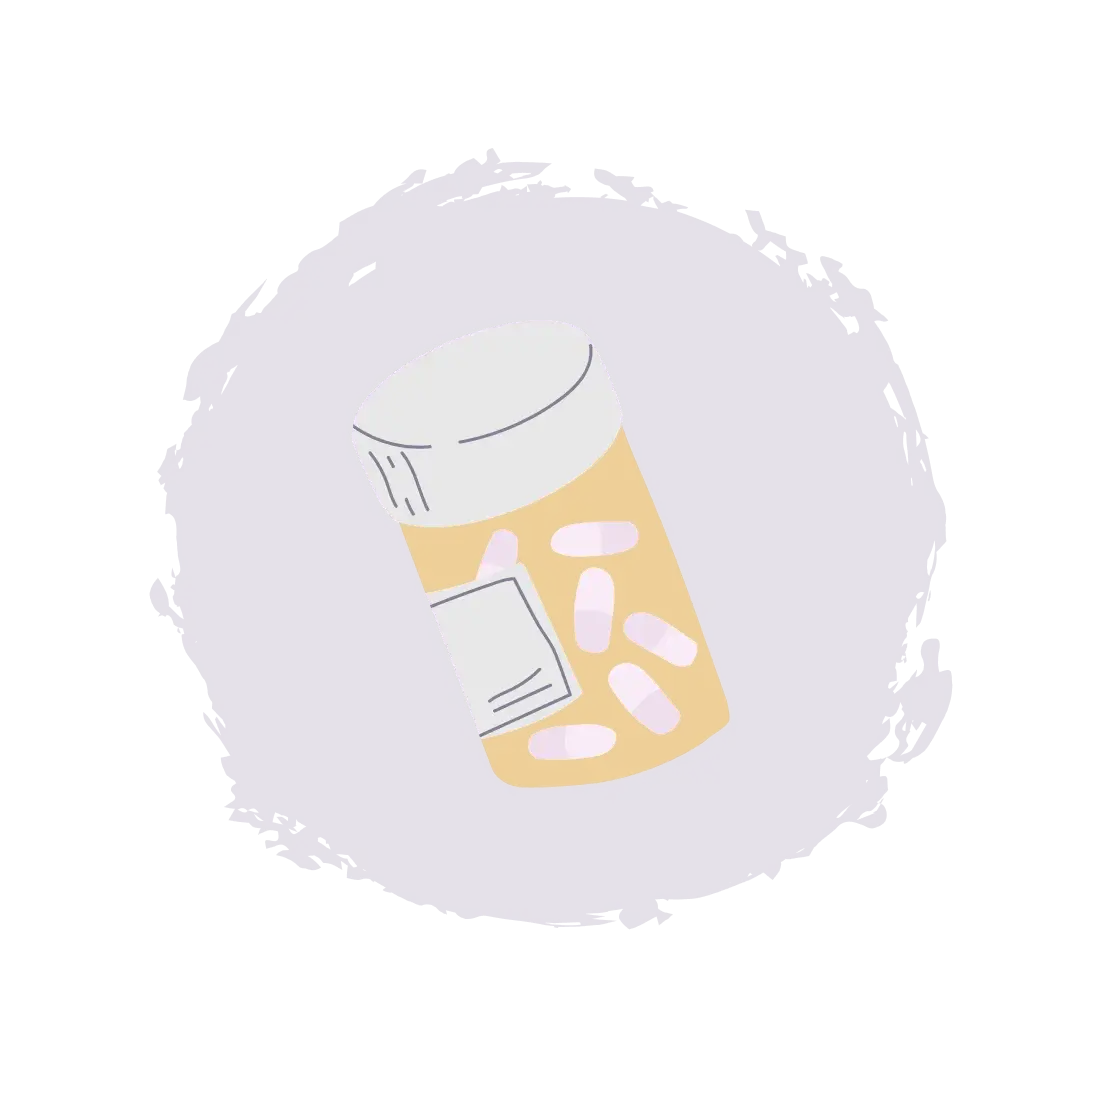 An illustrated image of a pill bottle